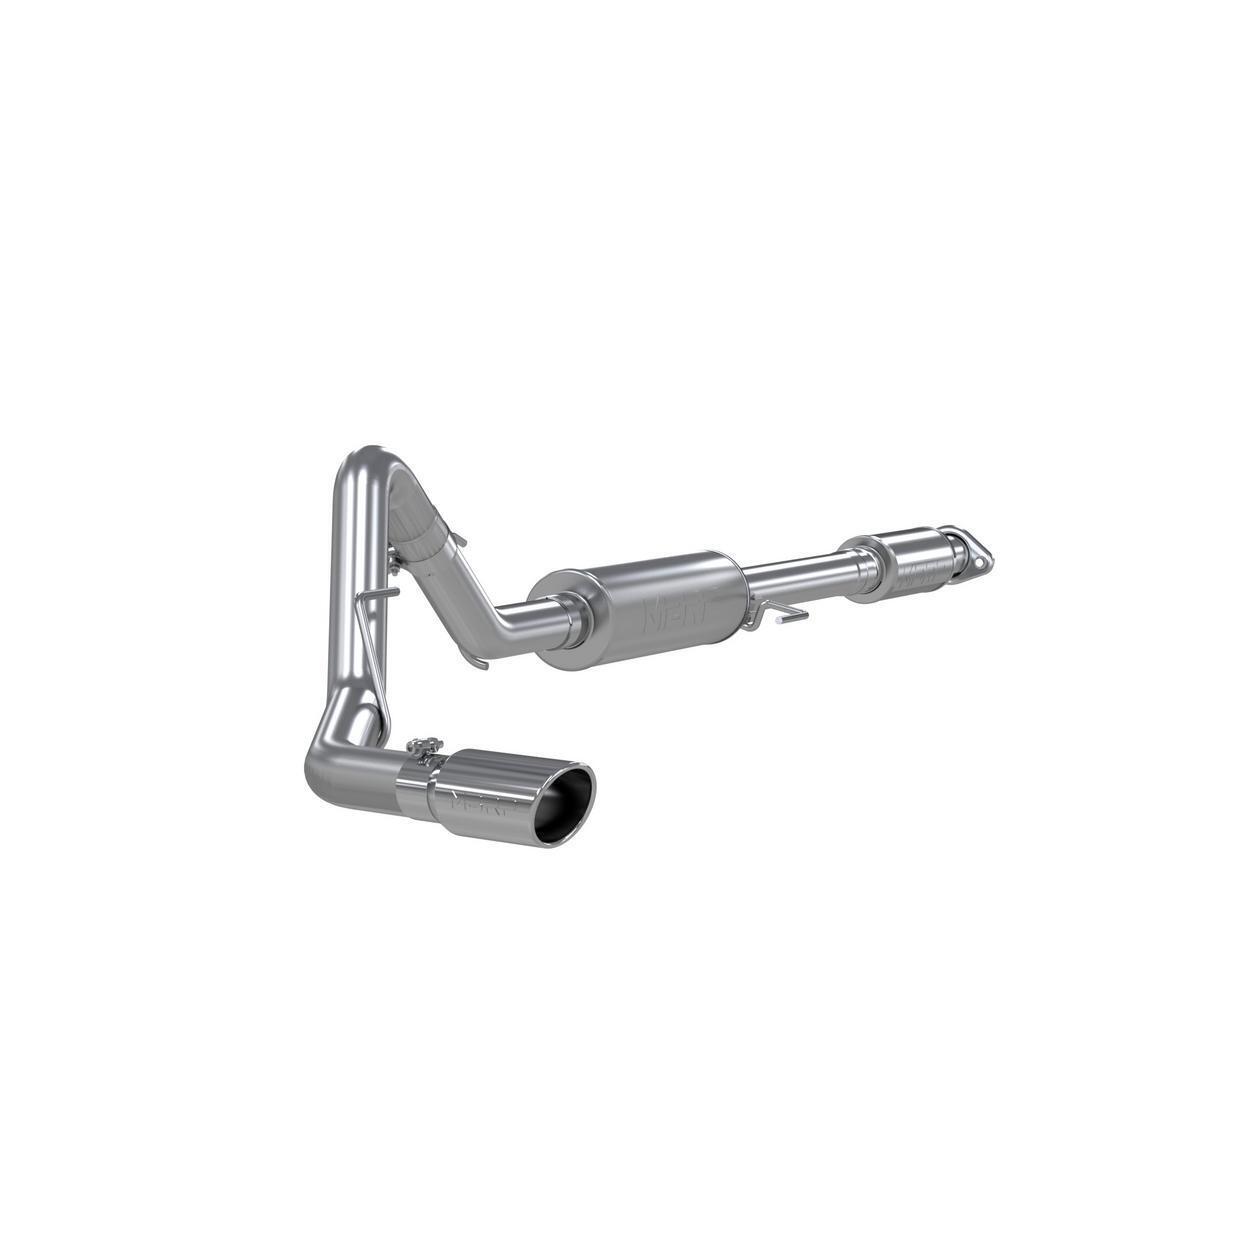 MBRP Exhaust S5256AL-HQ Exhaust System Kit for 2020 Ford F-150